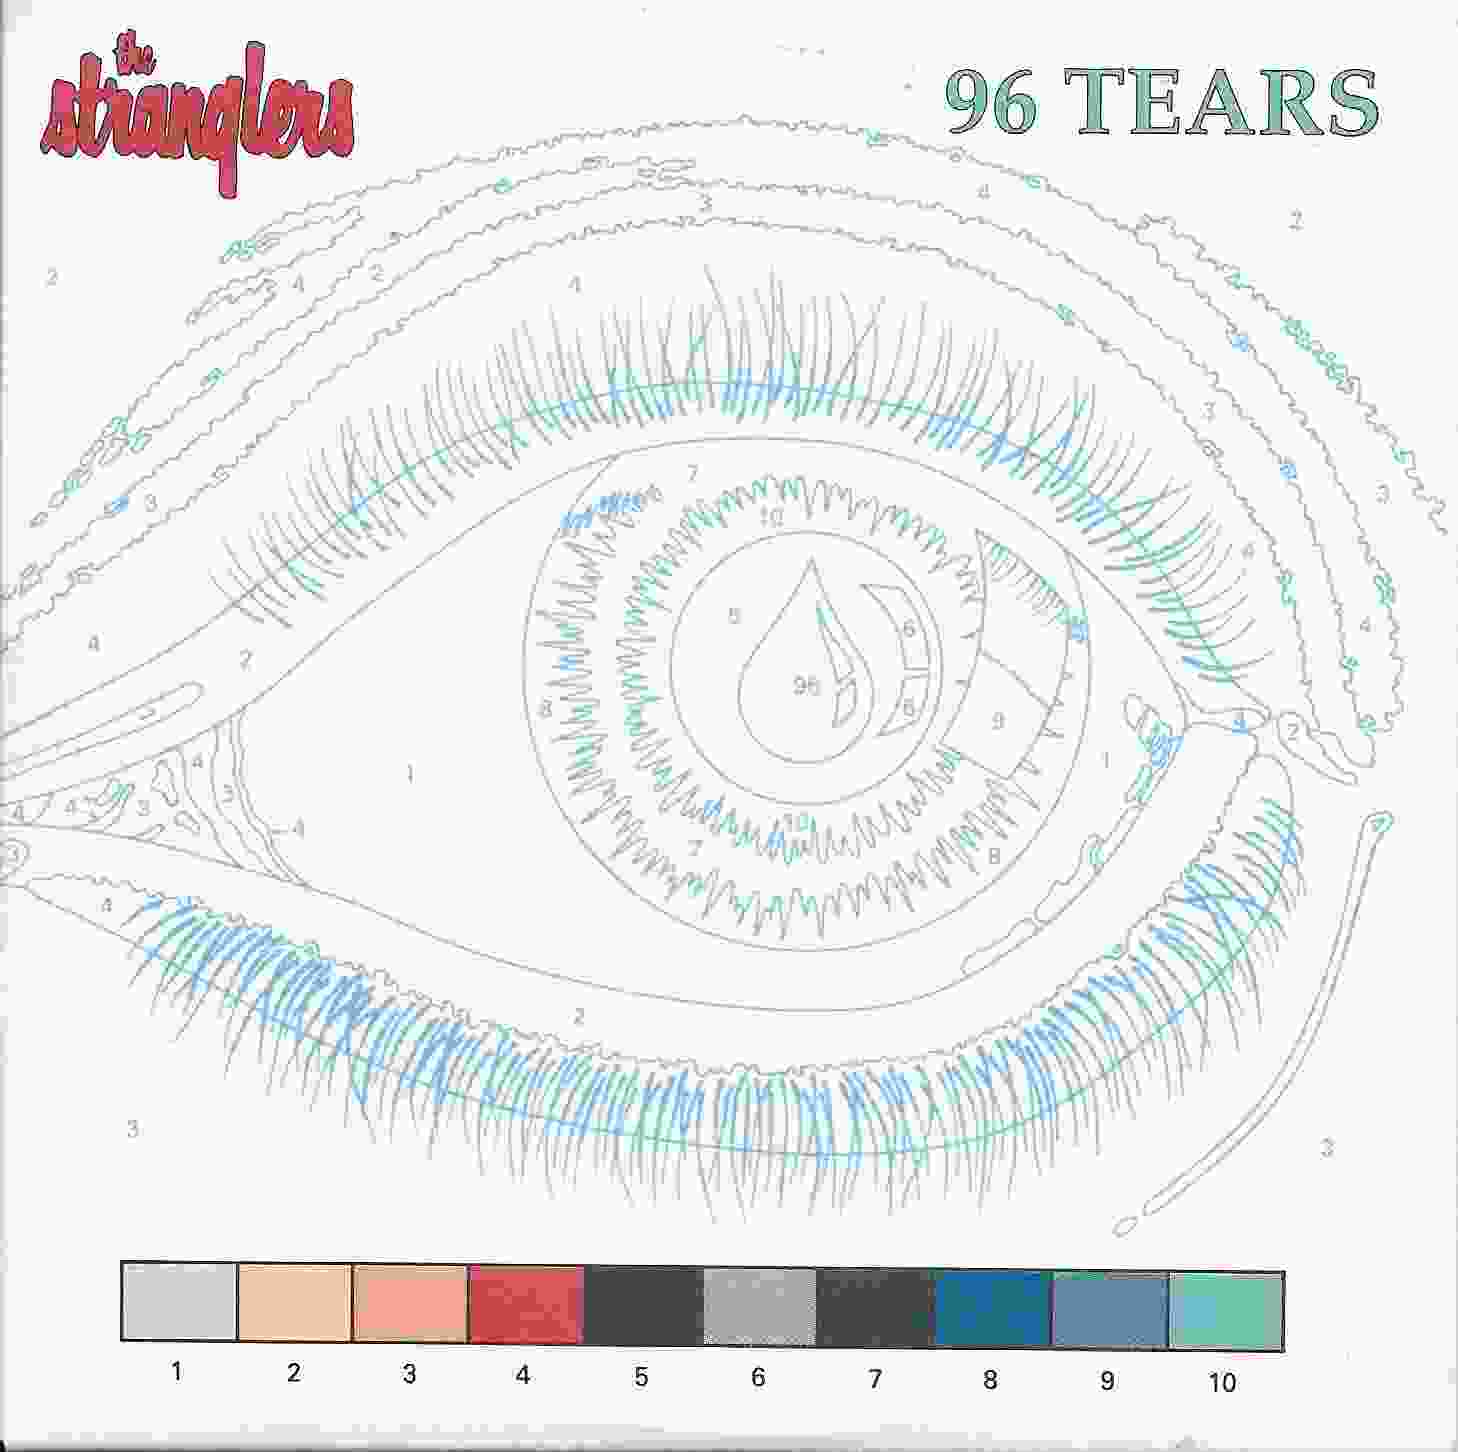 Picture of 96 tears by artist The Stranglers  from The Stranglers cdsingles